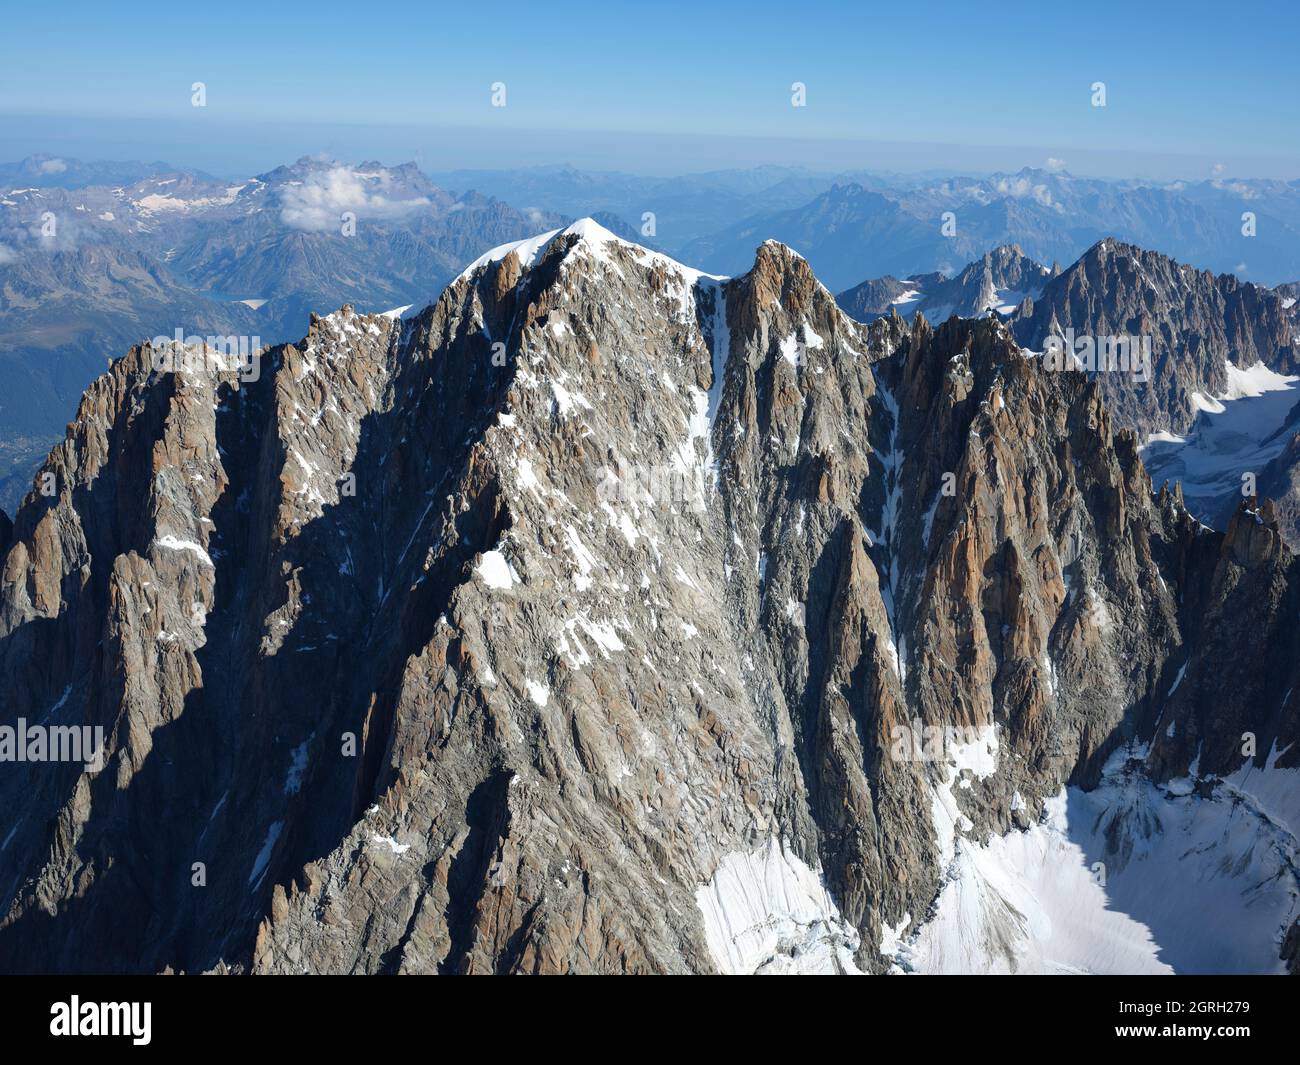 AERIAL VIEW from the south. Aiguille Verte (elevation: 4122 meters), Chamonix, Mont Blanc Massif, Haute-Savoie, France. Stock Photo